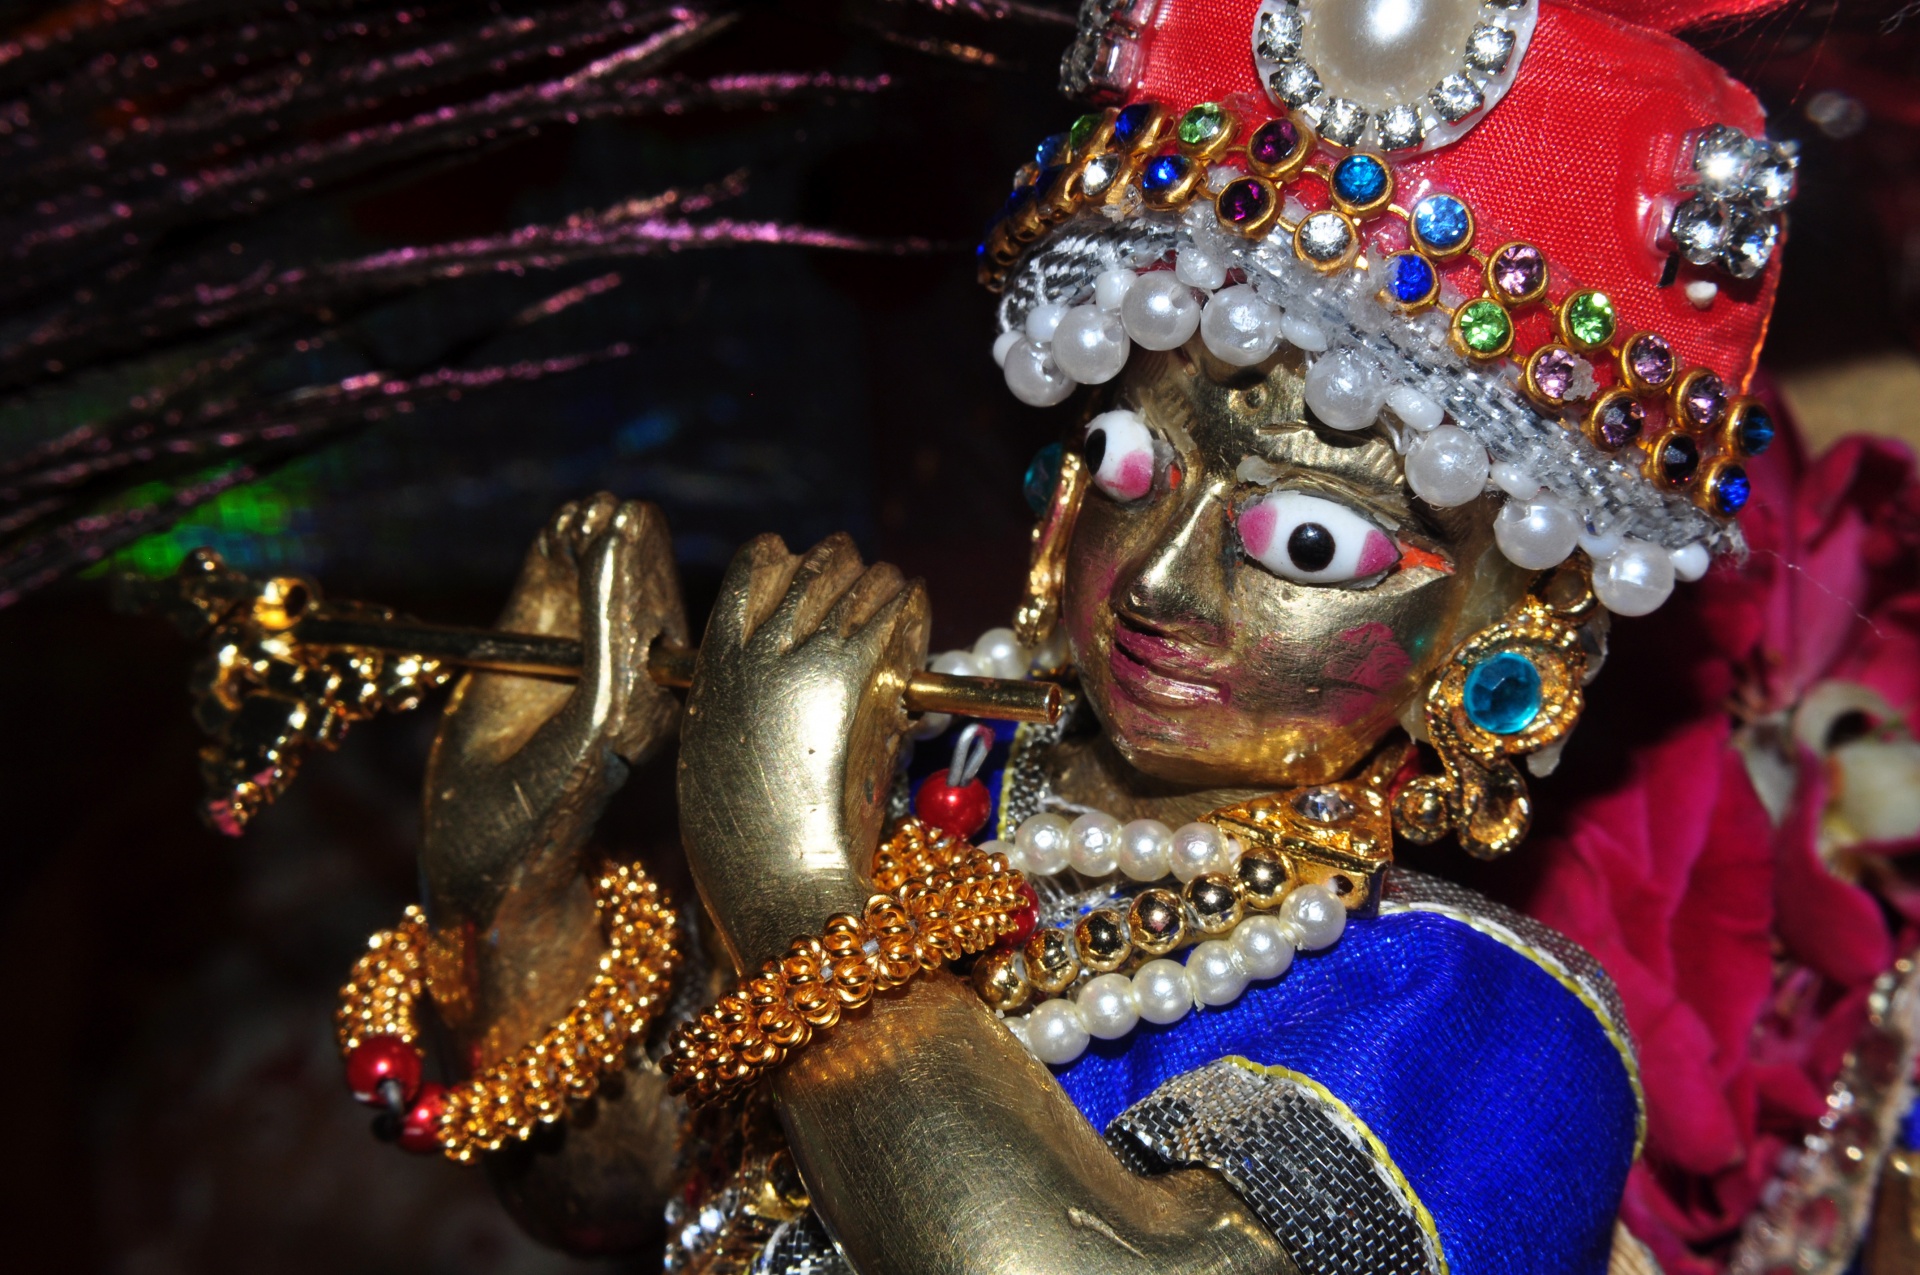 Beautifully decorated Lord Krishna on his birth day today